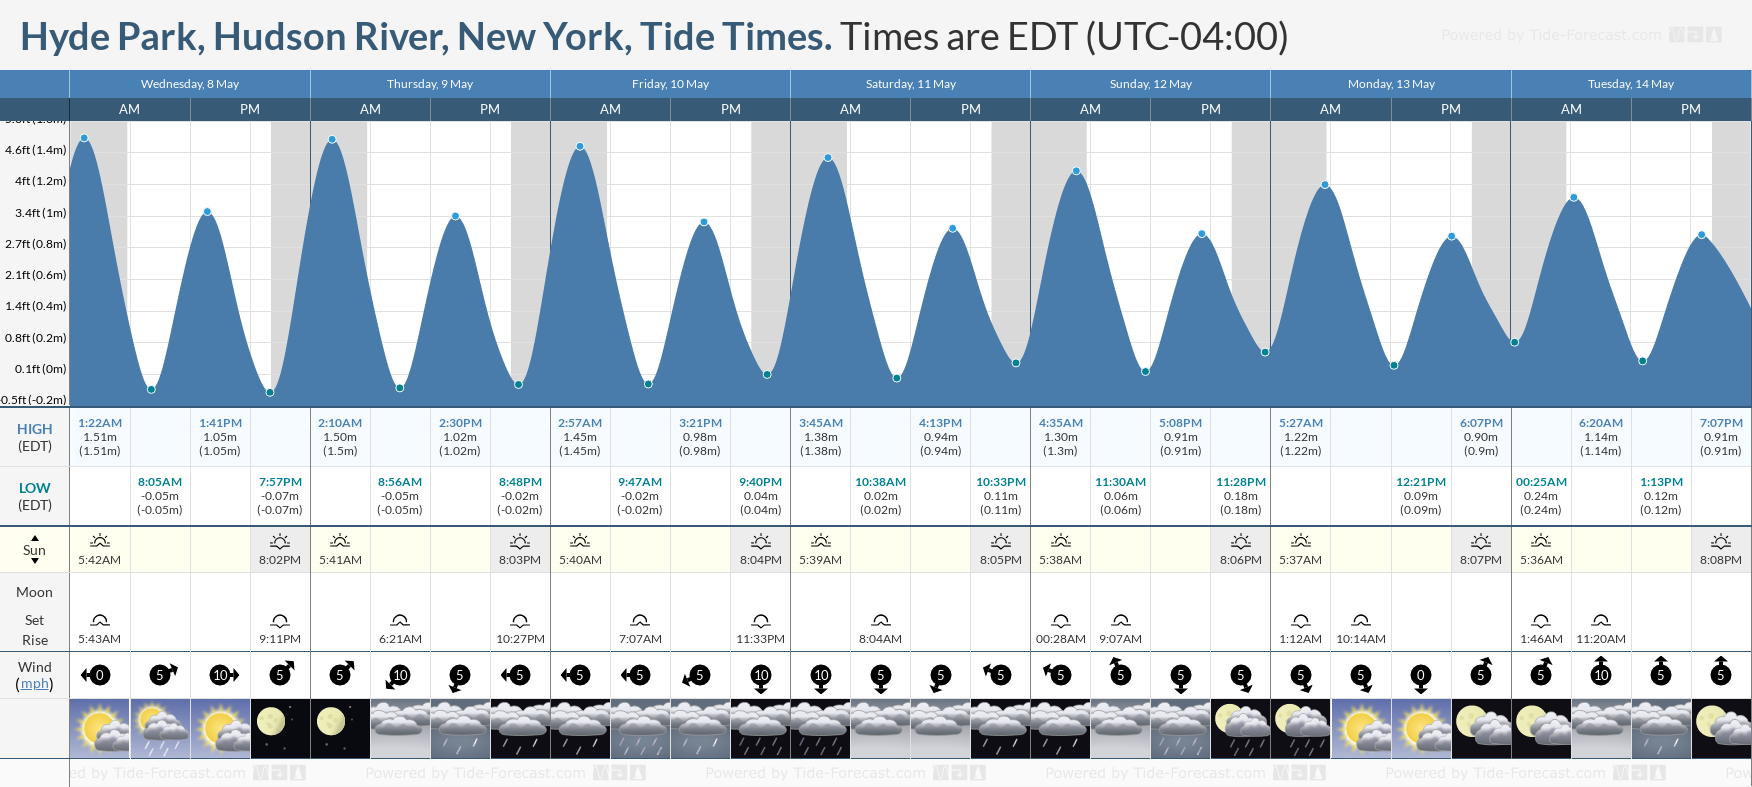 Hyde Park, Hudson River, New York Tide Chart including high and low tide tide times for the next 7 days